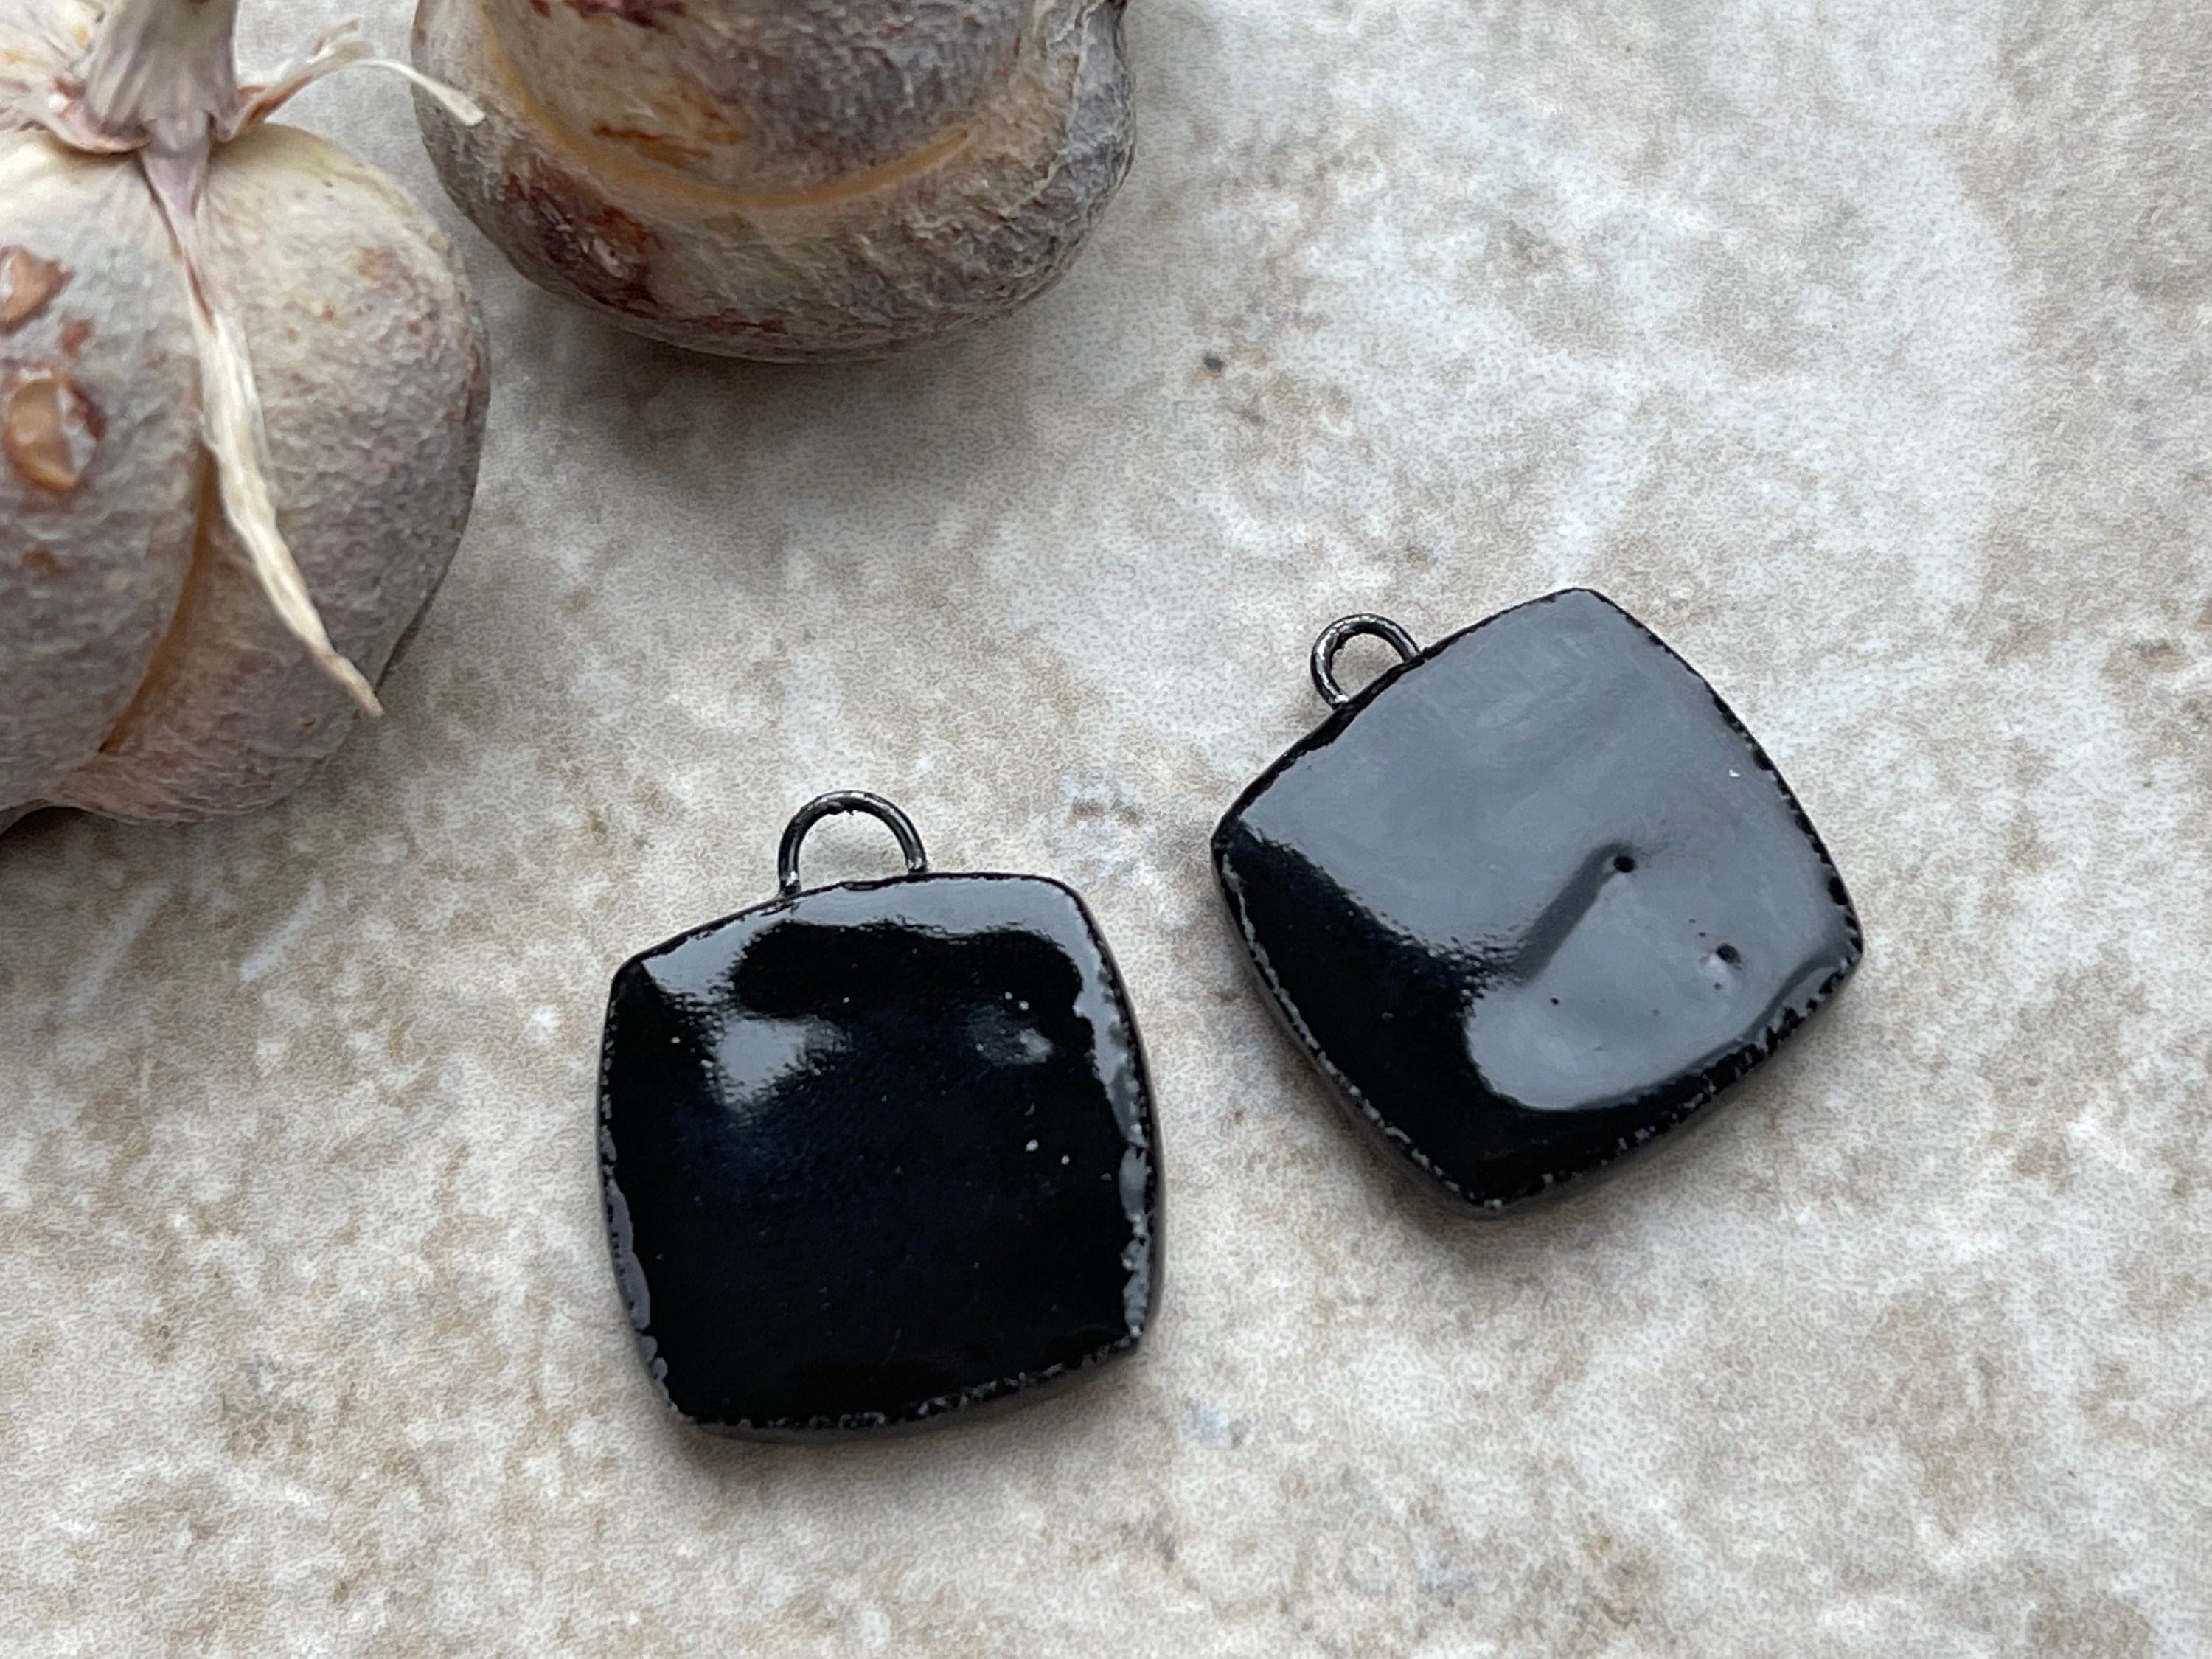 Scandanavian Bird and Tulip Beads, Black and White Square, Square Earring Bead Pair, Unique Beads, Porcelain Charms, Jewelry Components